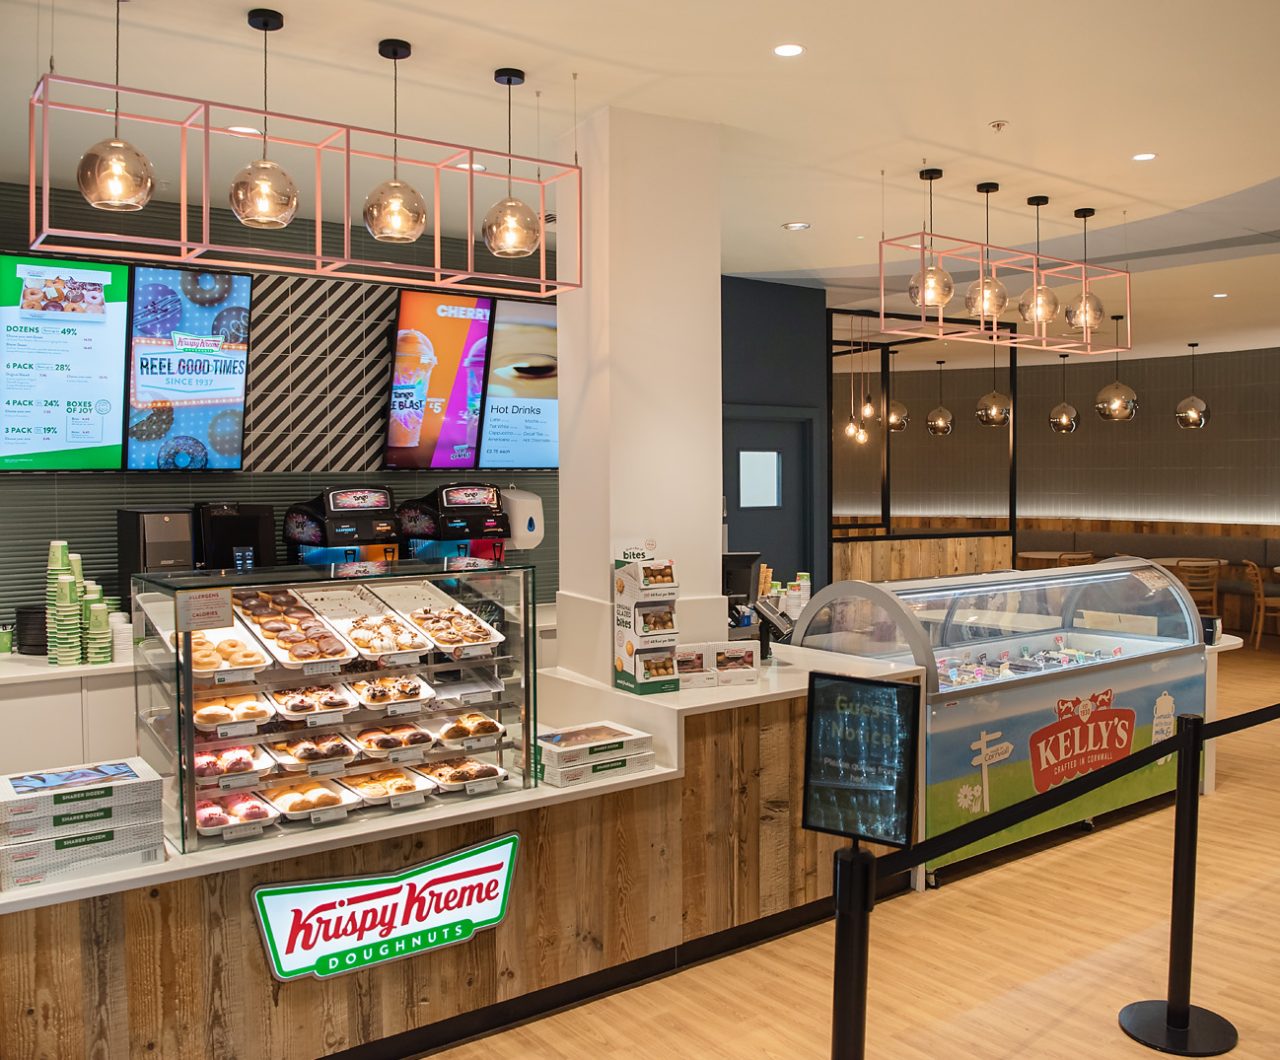 Image of our new cafe bar Refresh with Krispy Kreme doughnut and Kelly's Ice Cream stand